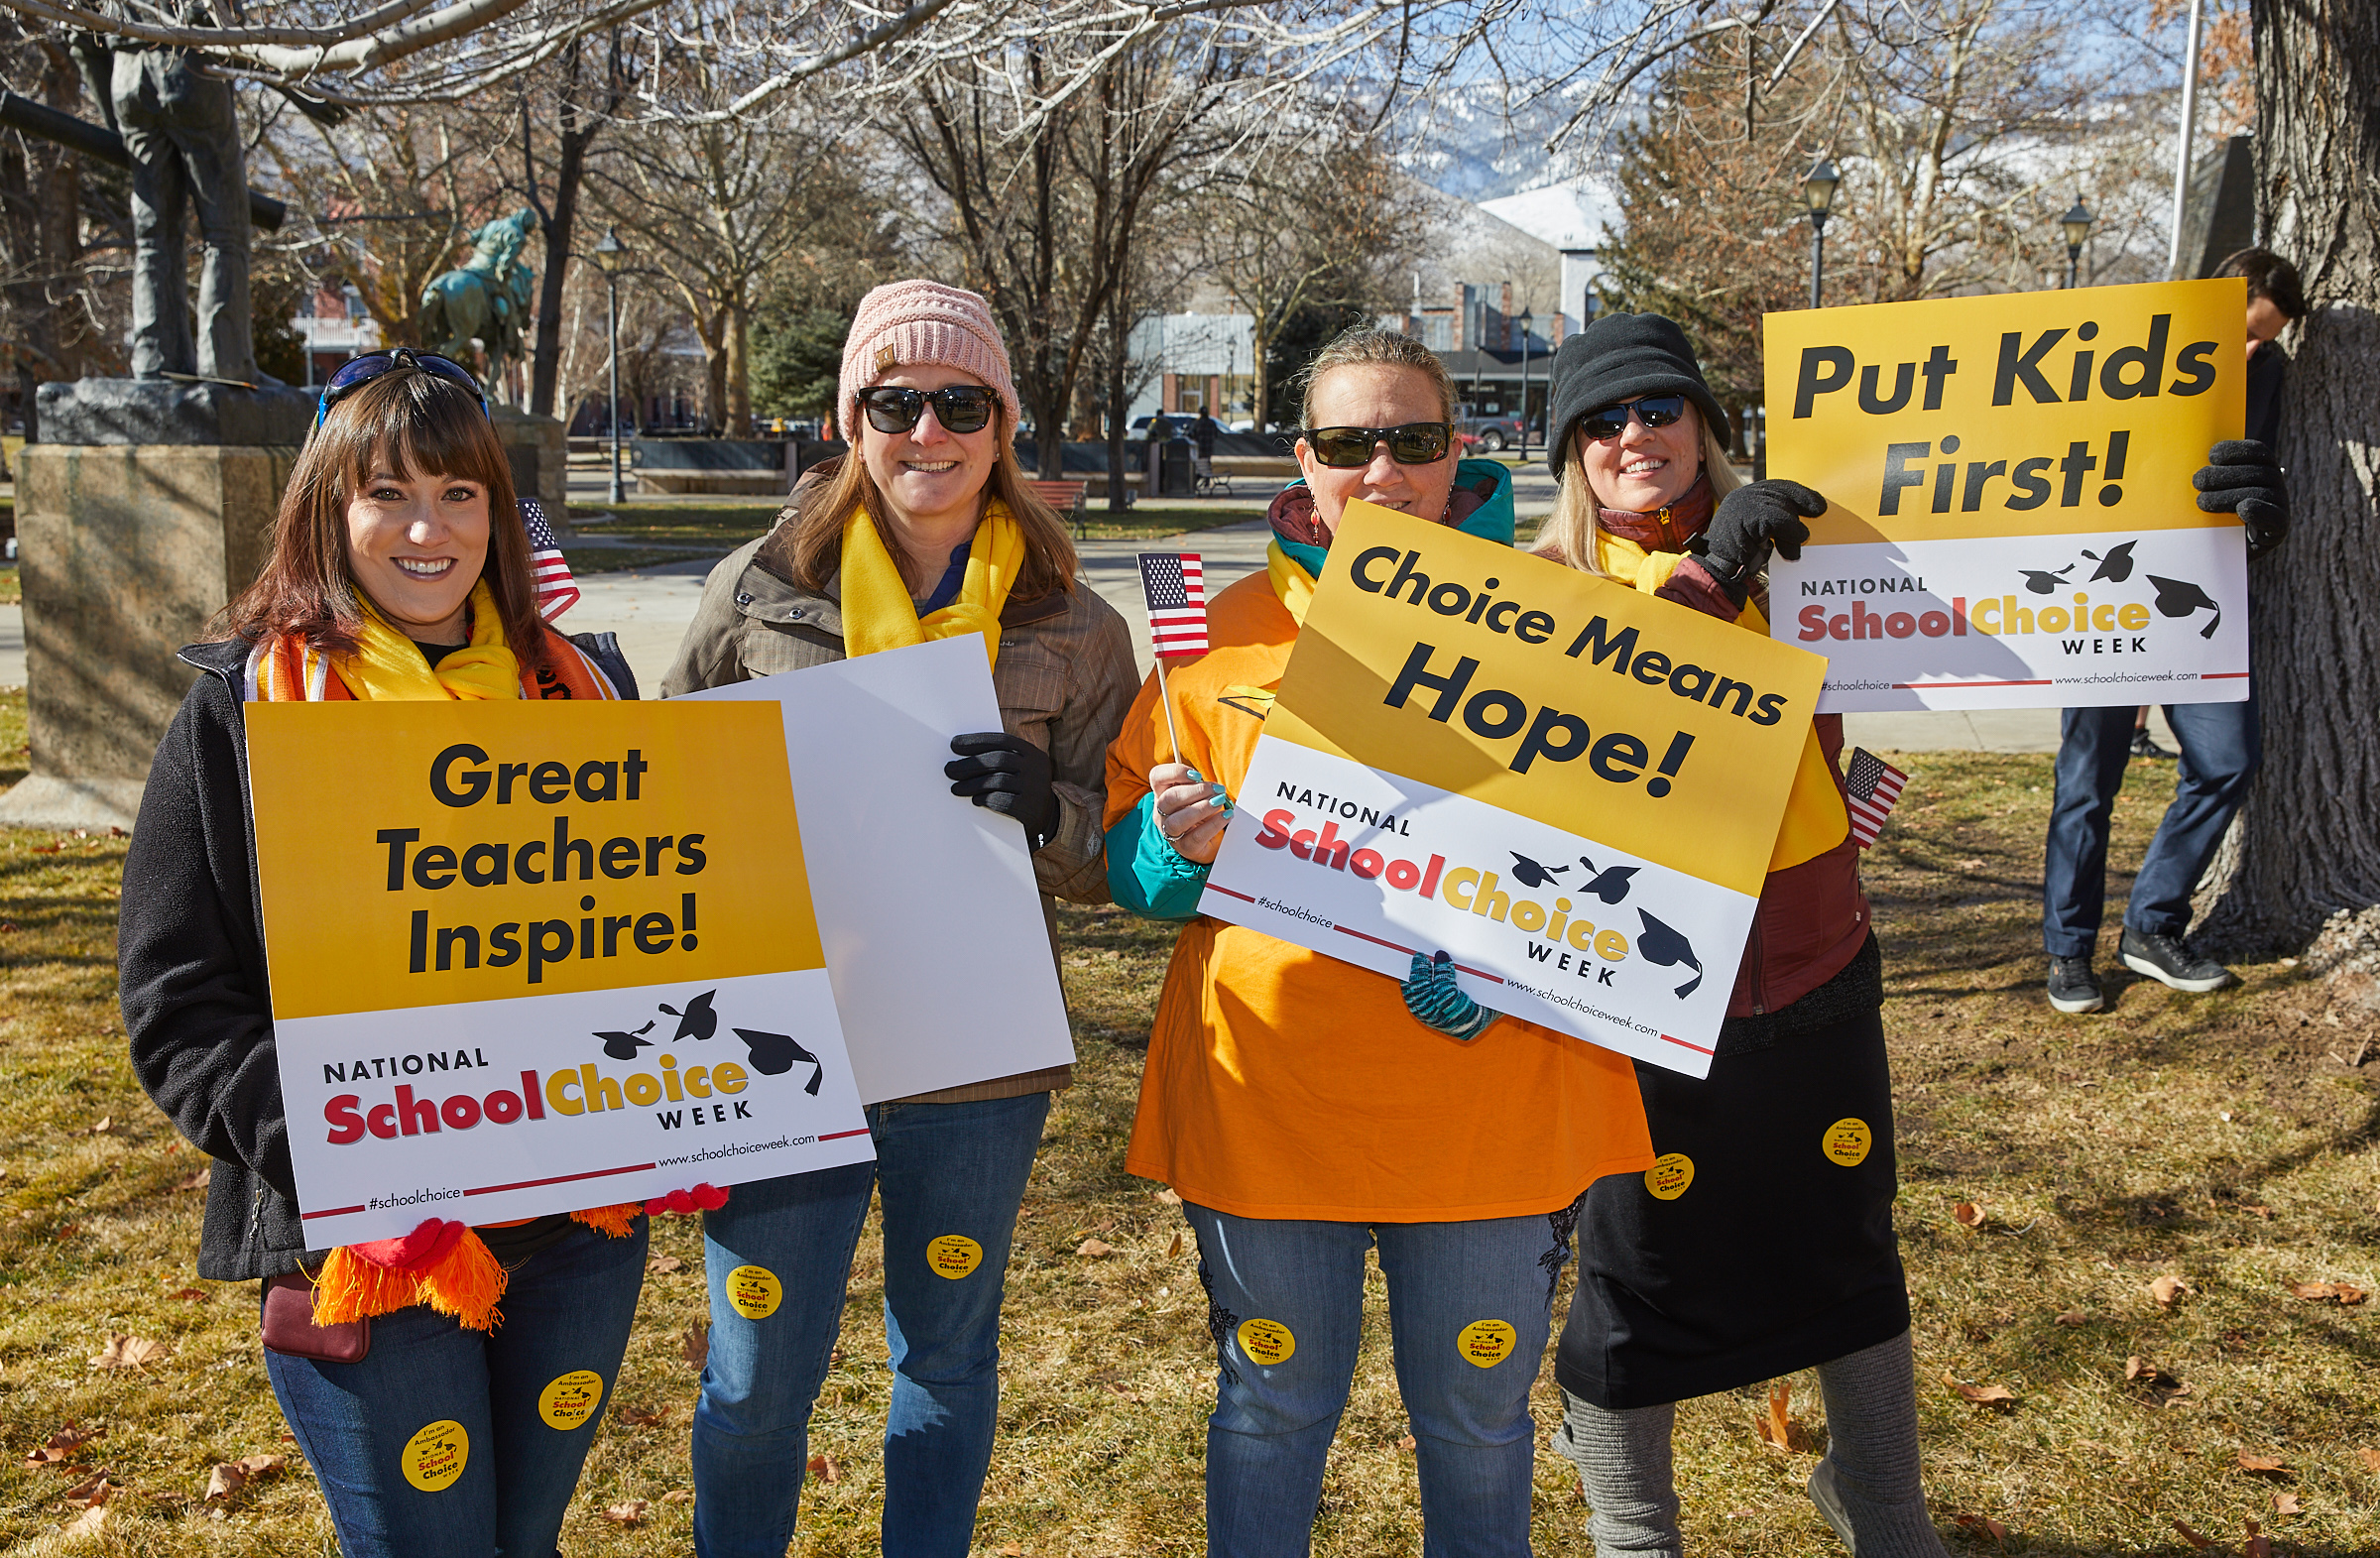 Teachers join in the School Choice Week celebration! The Week is an opportunity to recognize teachers' role in children's education.